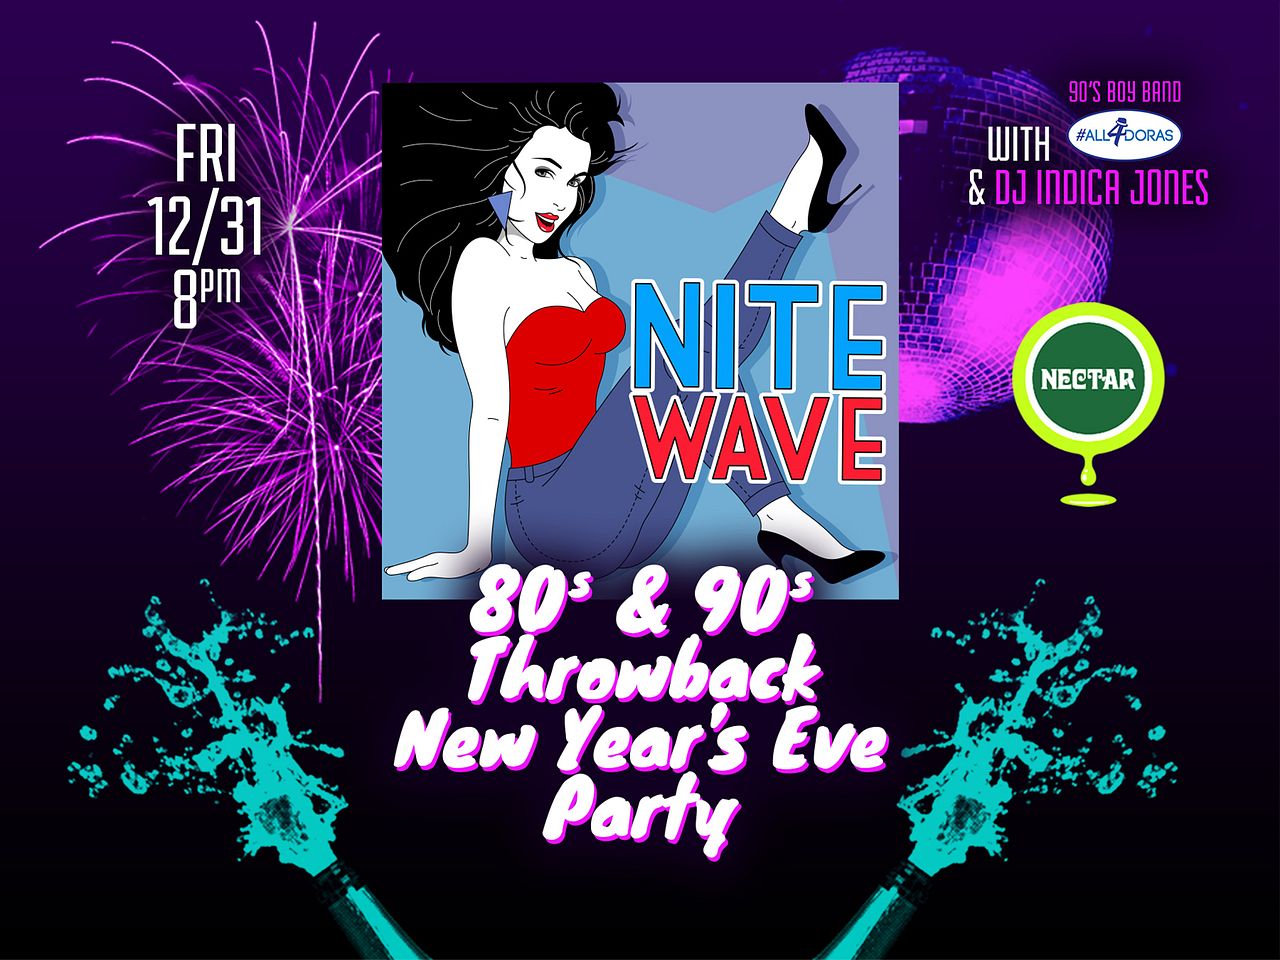 NITE WAVE ('80s New Wave) w/ All4Doras (Boy Band) Tickets at Nectar